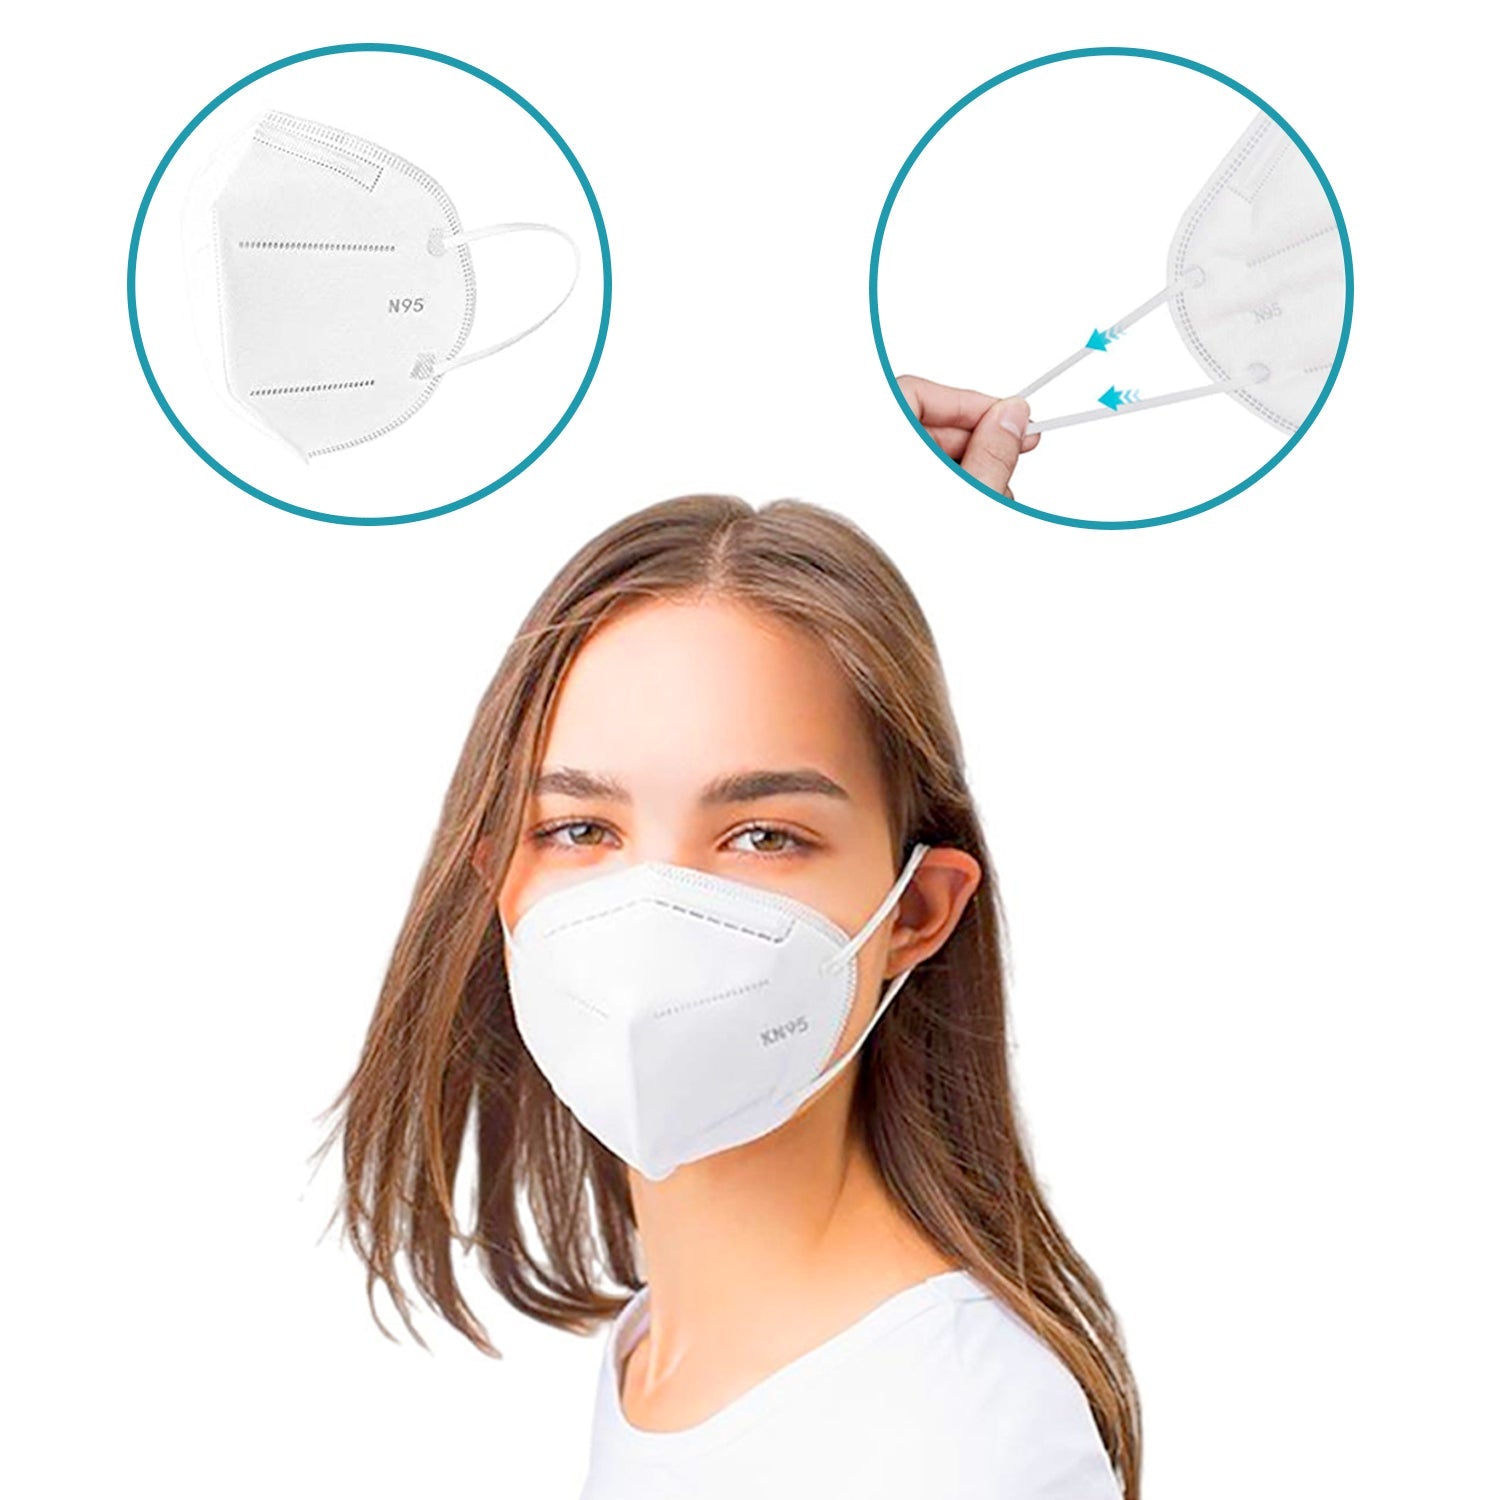 0258  N95 Reusable and Washable Anti Pollution/Virus Face Mask DeoDap